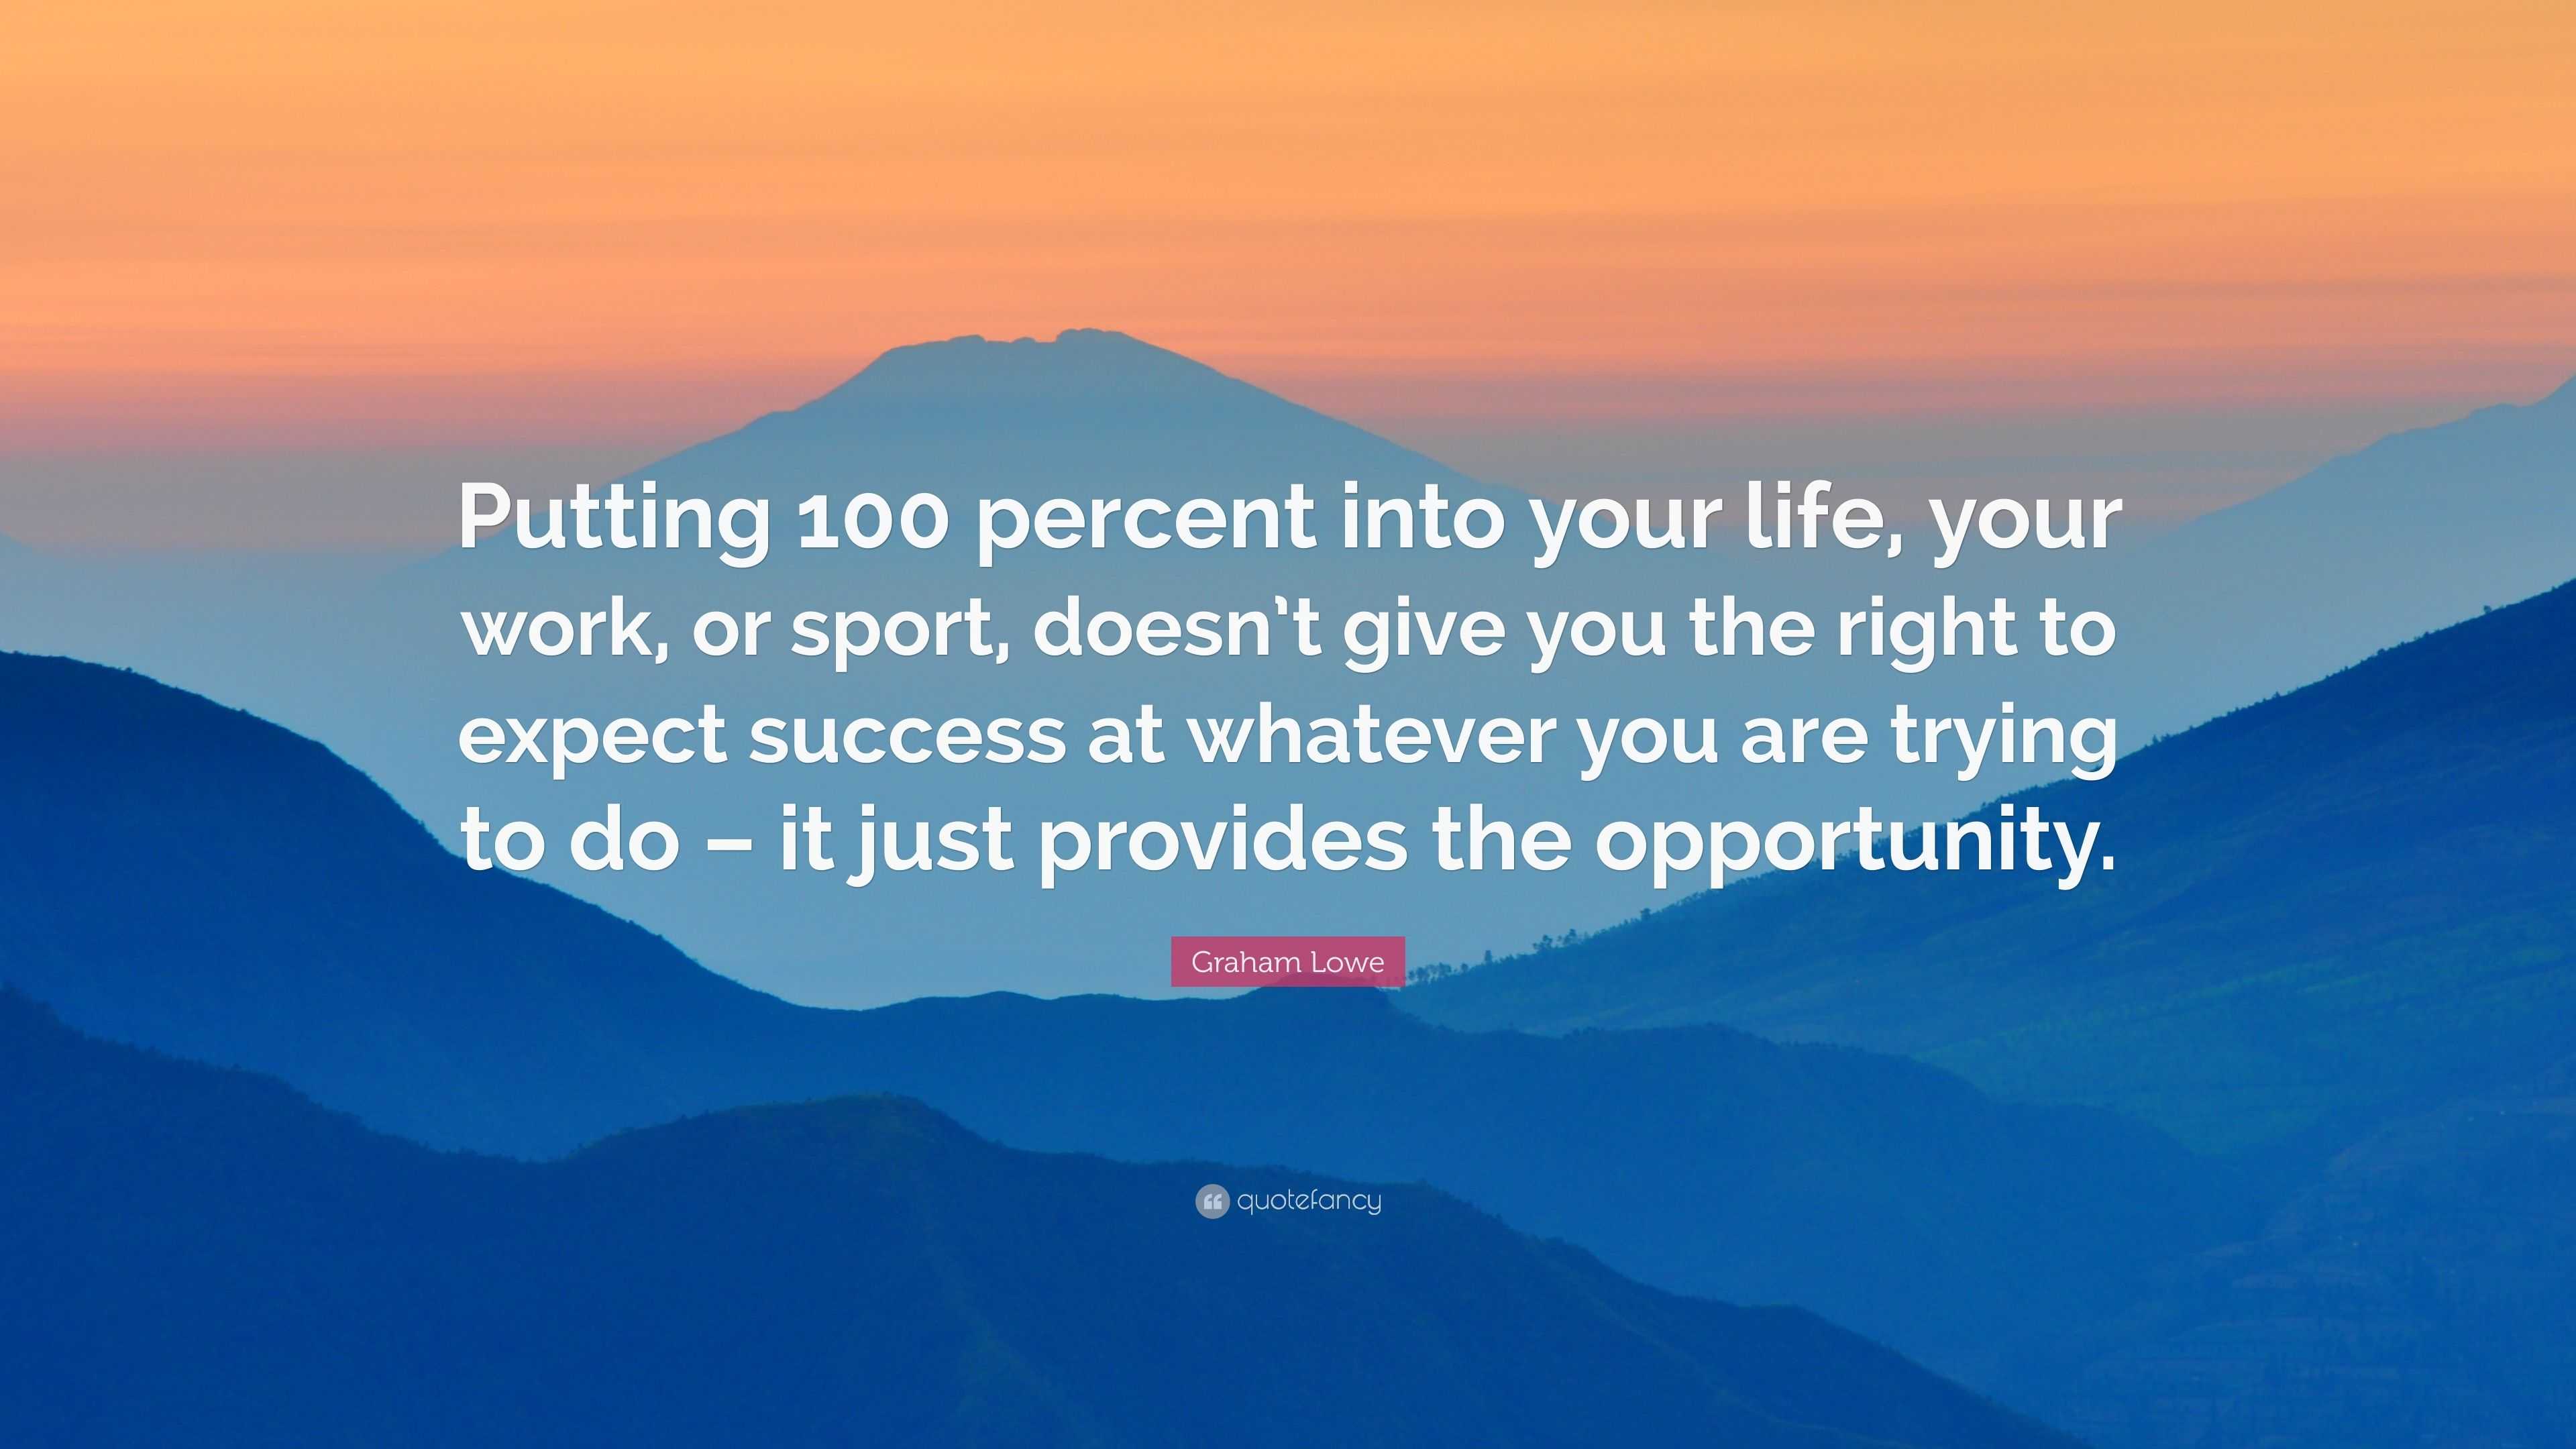 Graham Lowe Quote: “Putting 100 percent into your life, your work, or